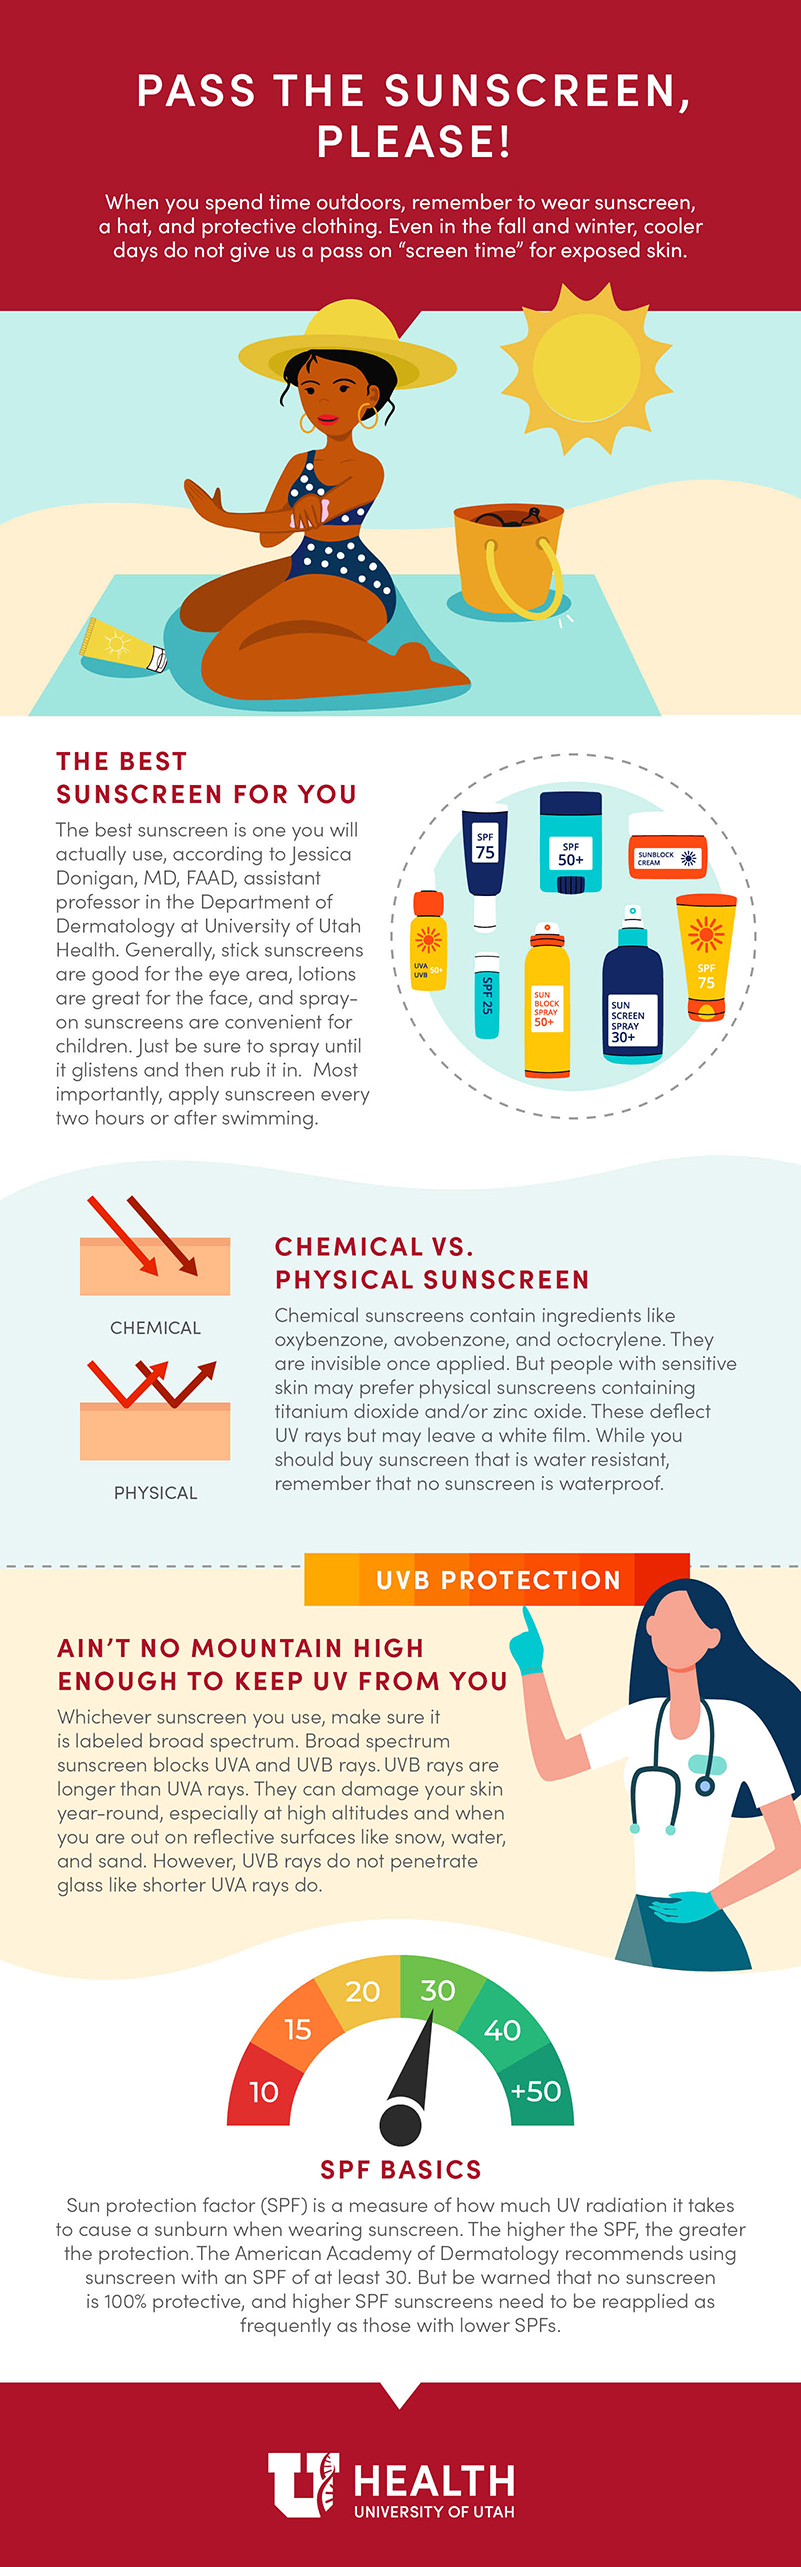 Infographic explains different types of sunscreen and the one that is best for you.